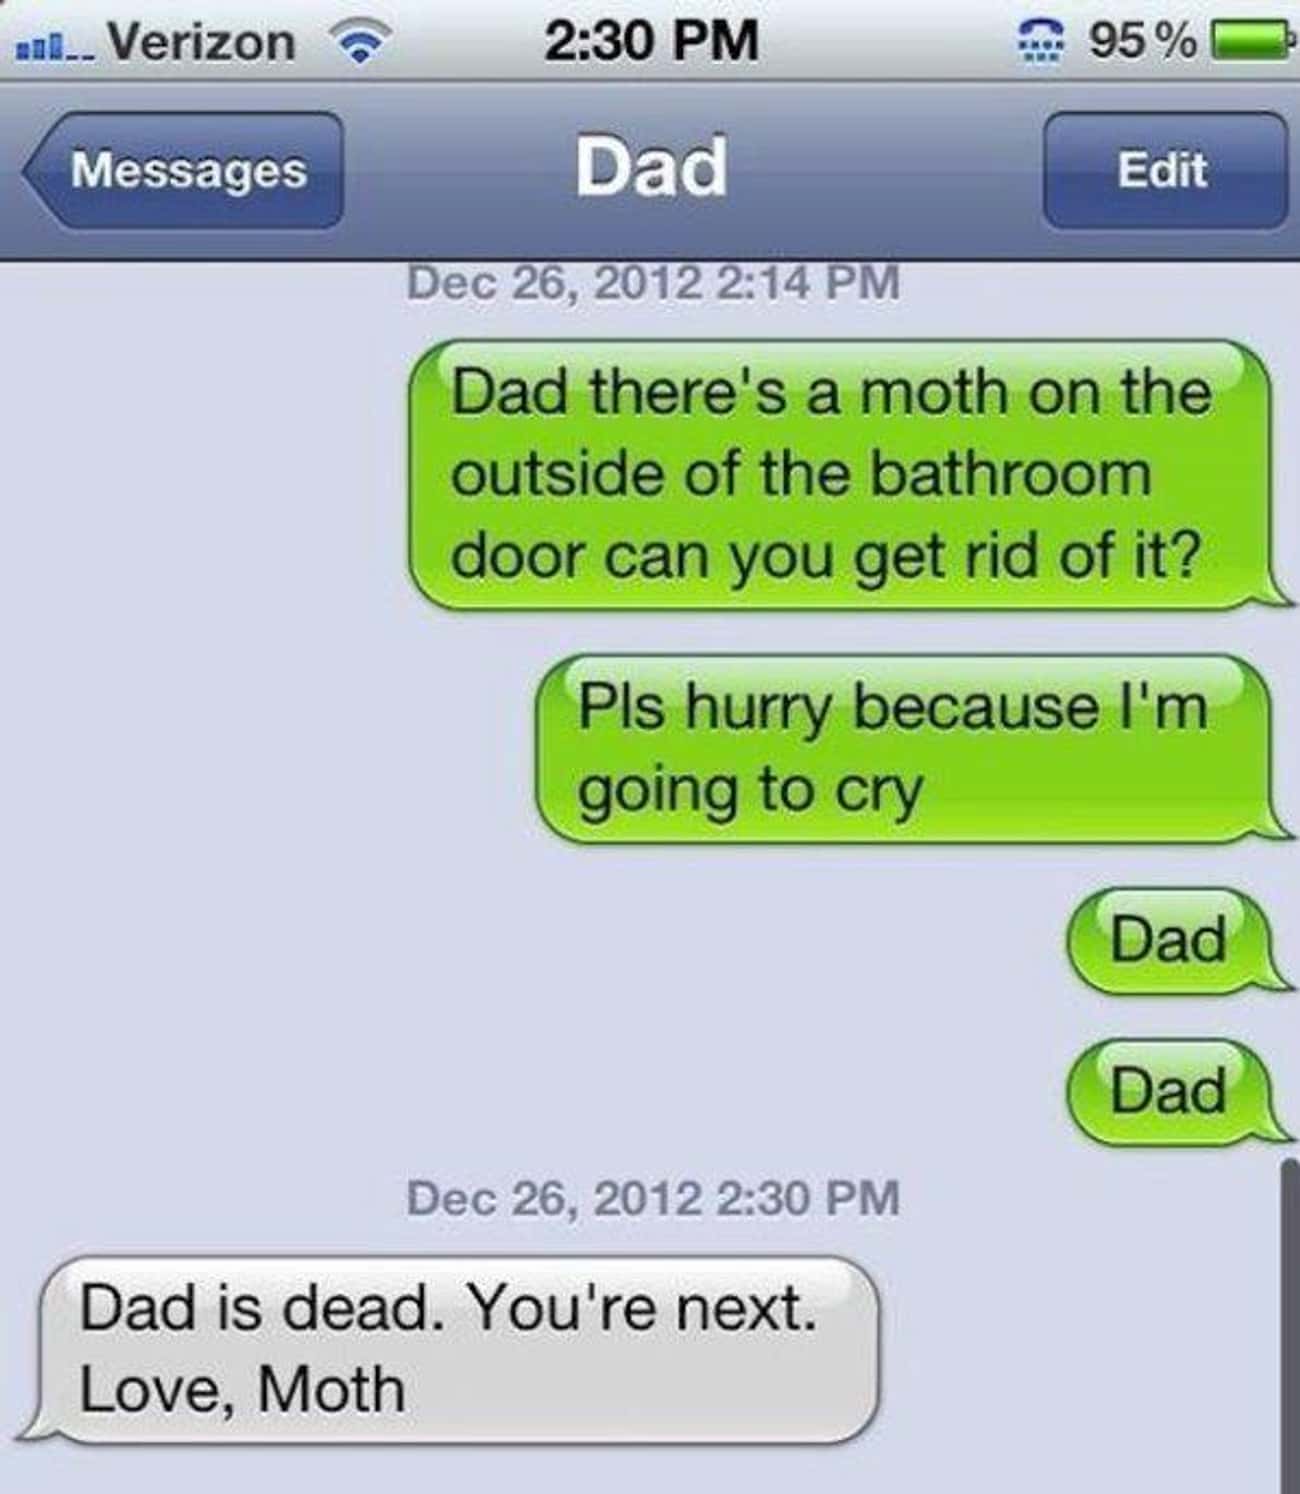 Be the Moth